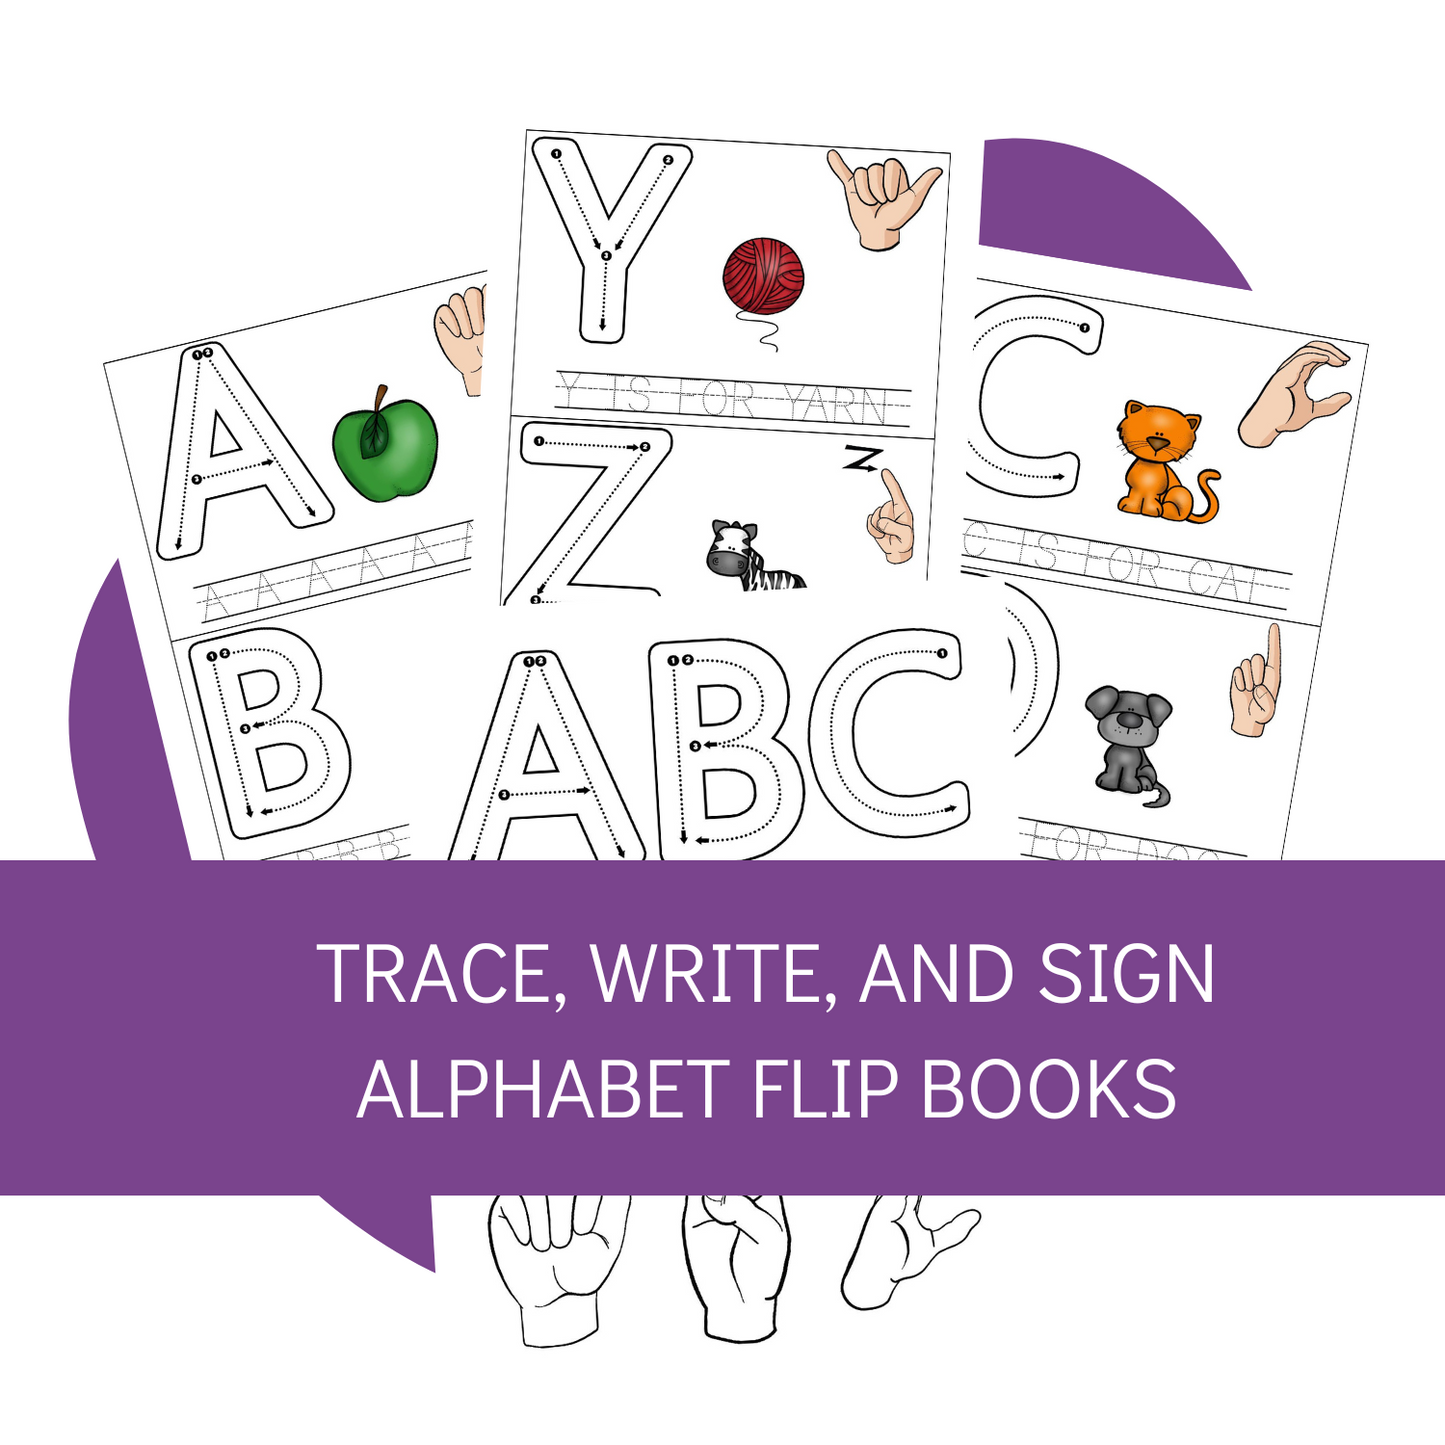 Write, Trace, and Sign ABC Flip Books